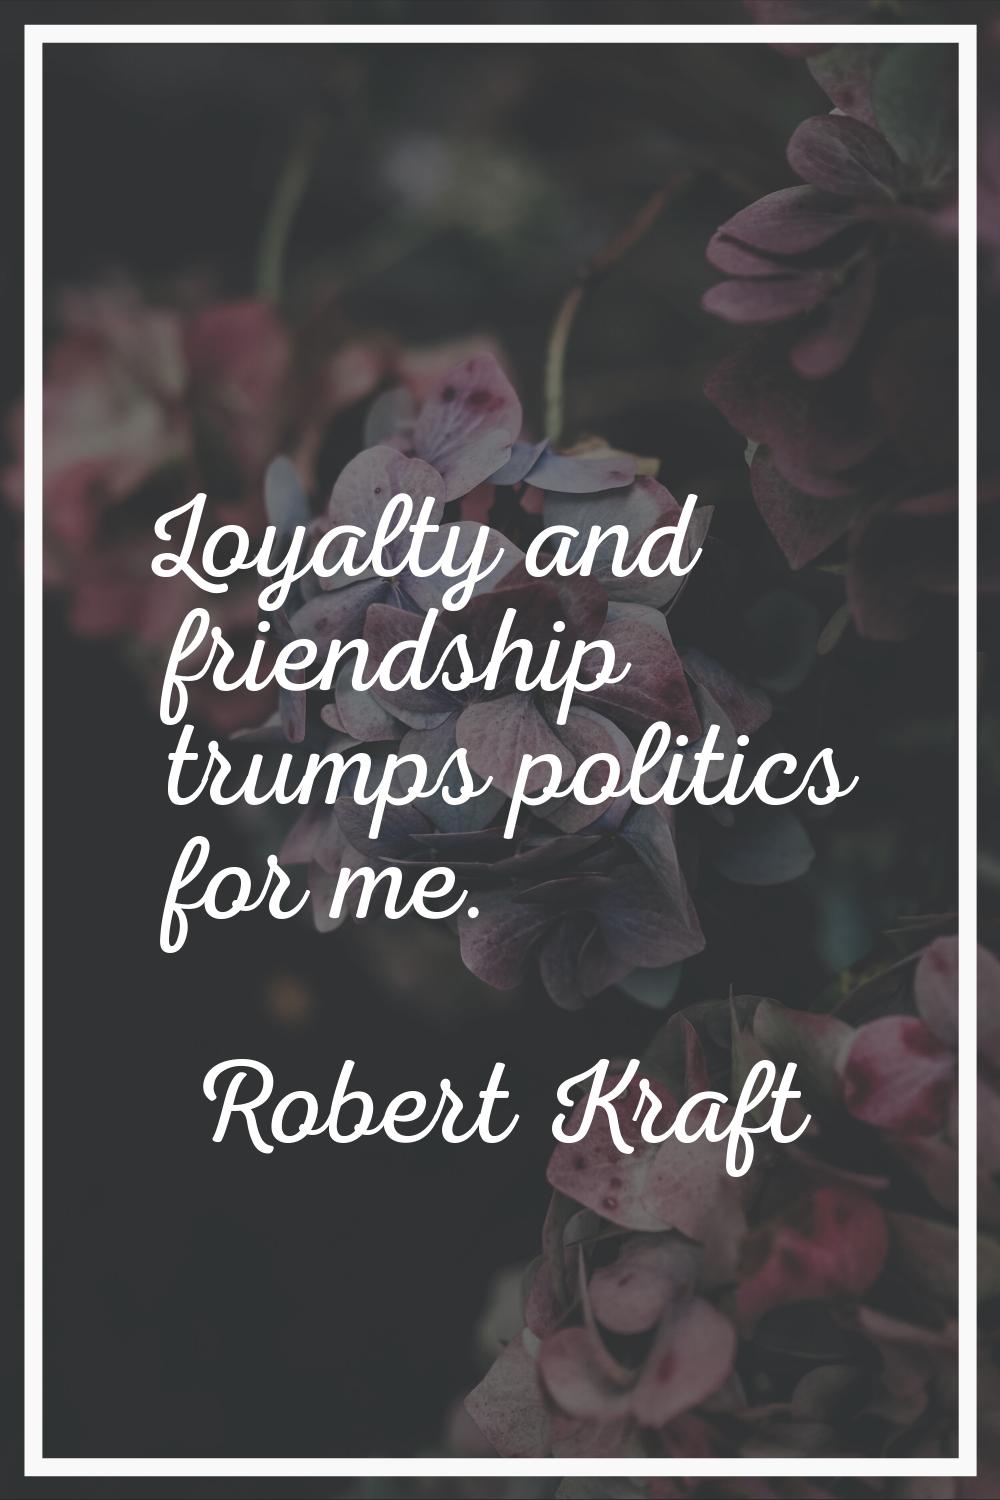 Loyalty and friendship trumps politics for me.